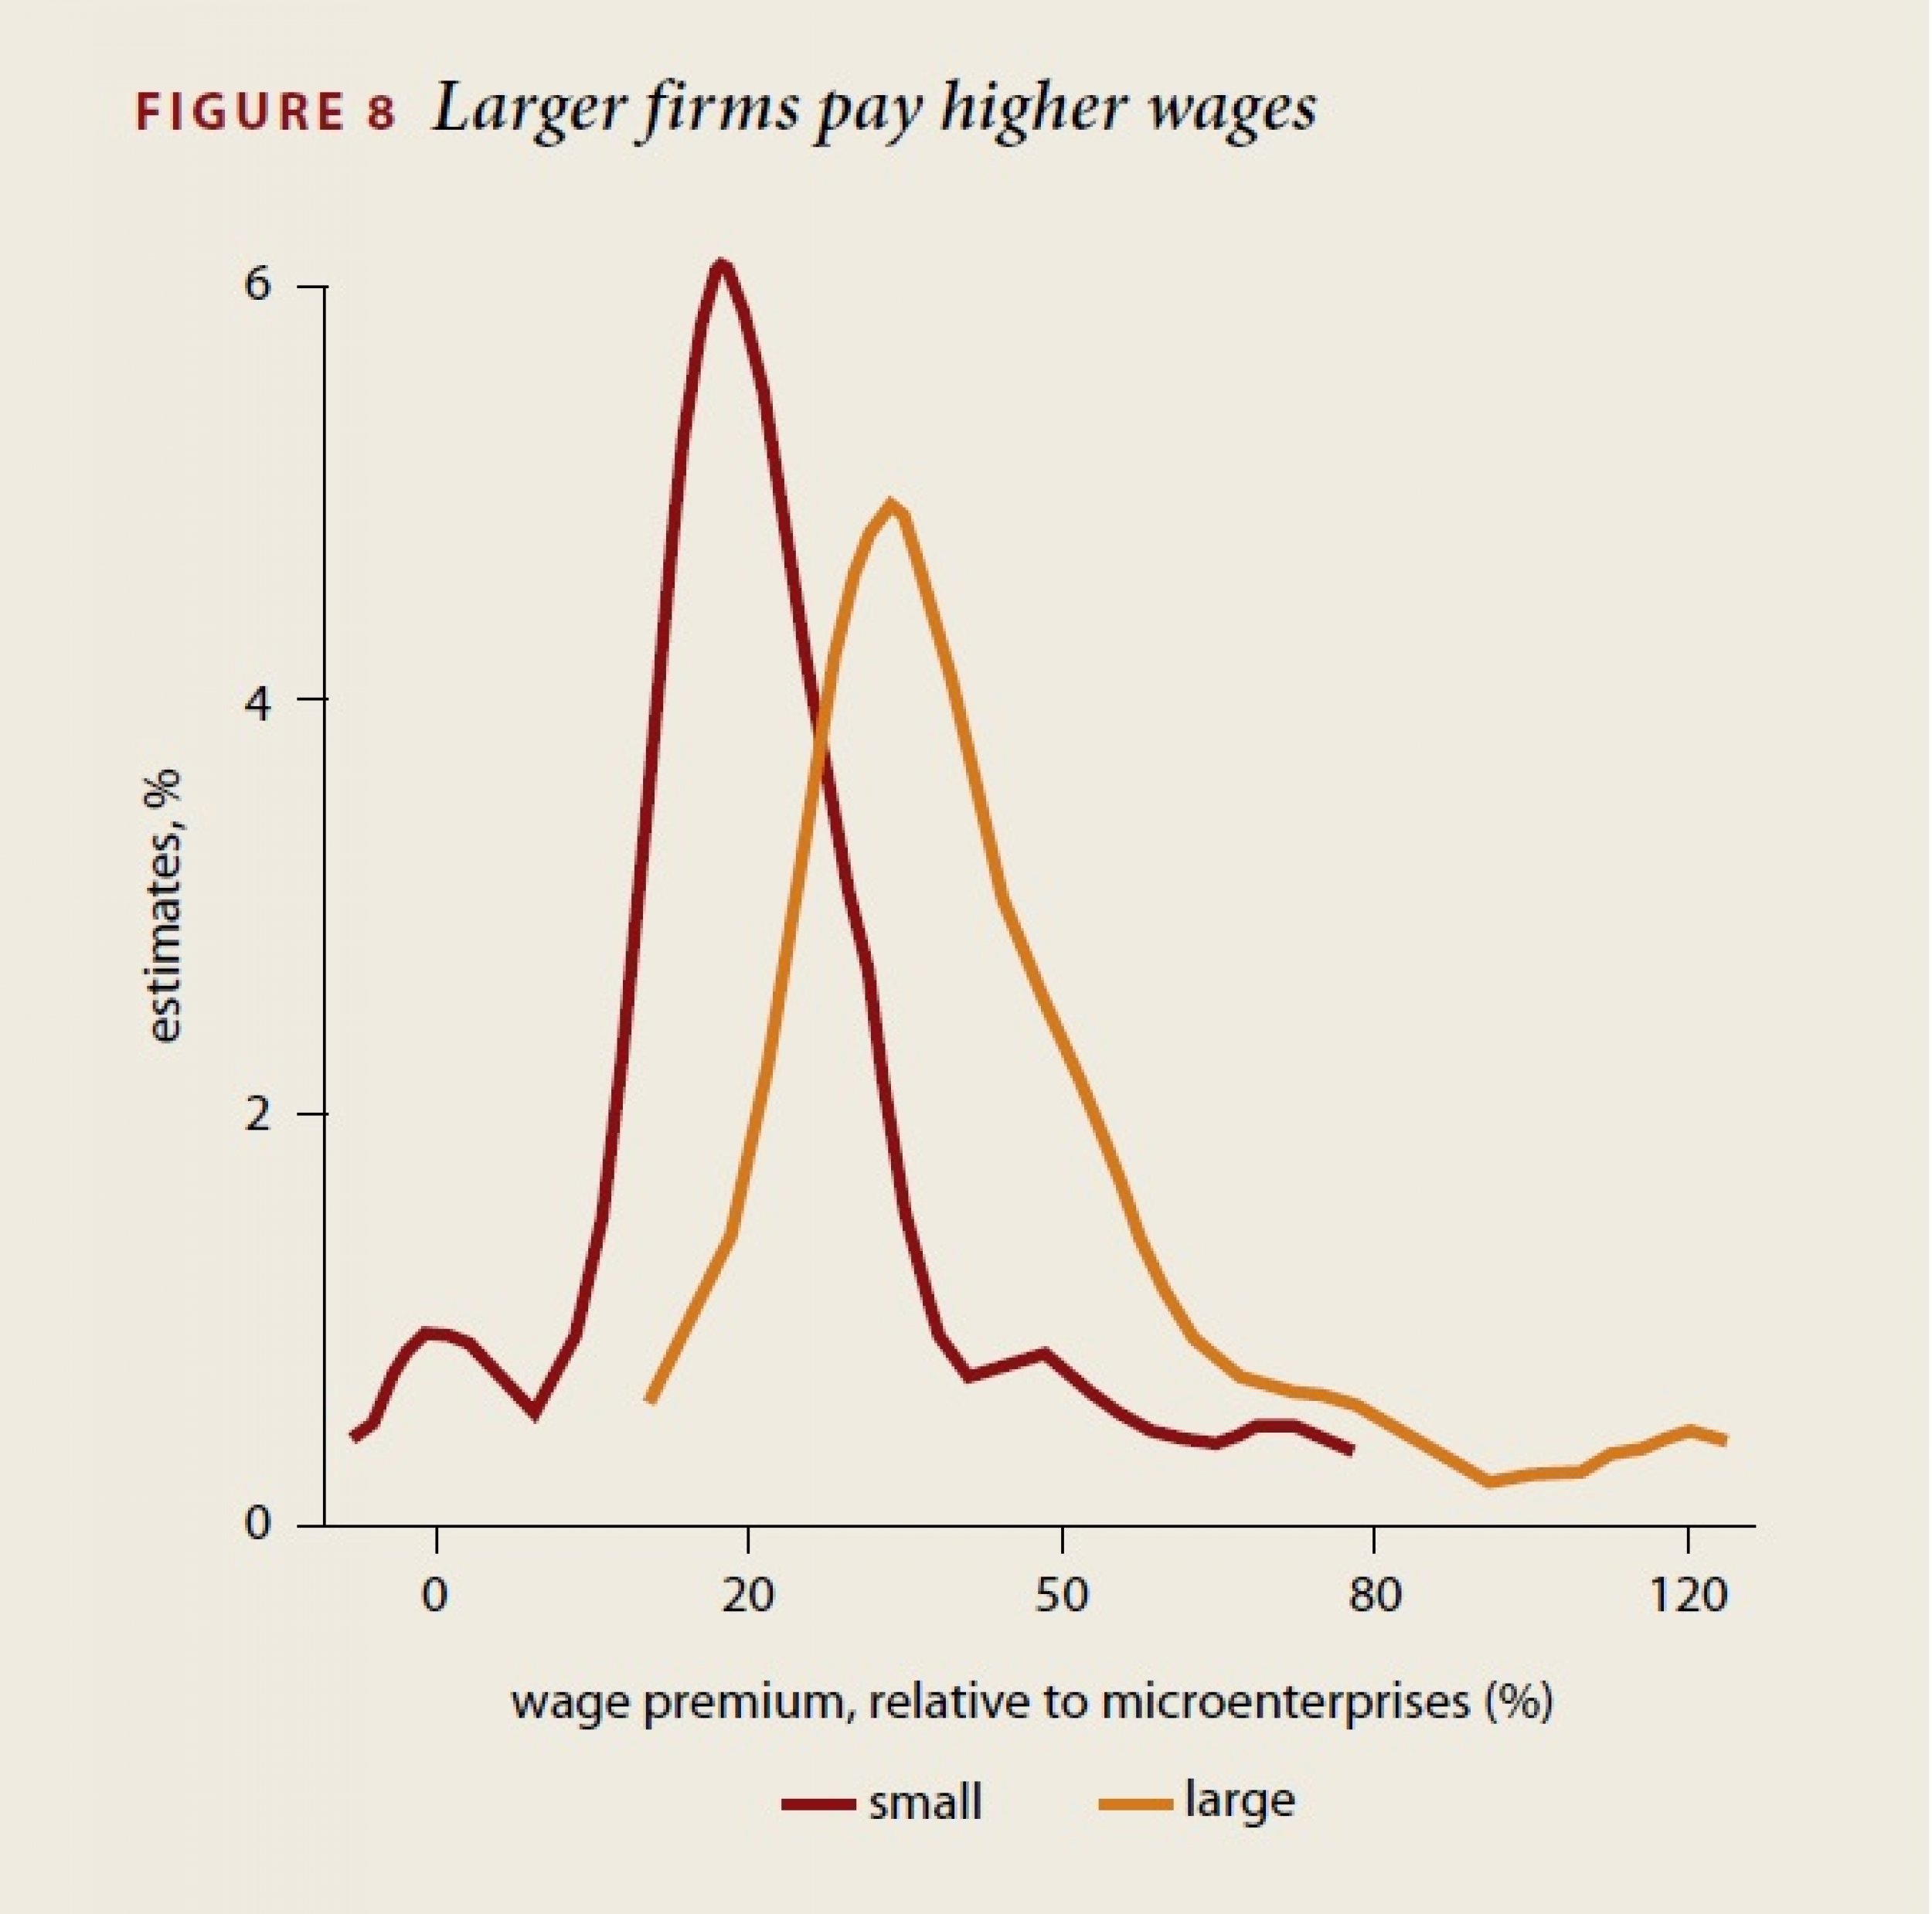 Surprise 6 Large companies pay much higher wages